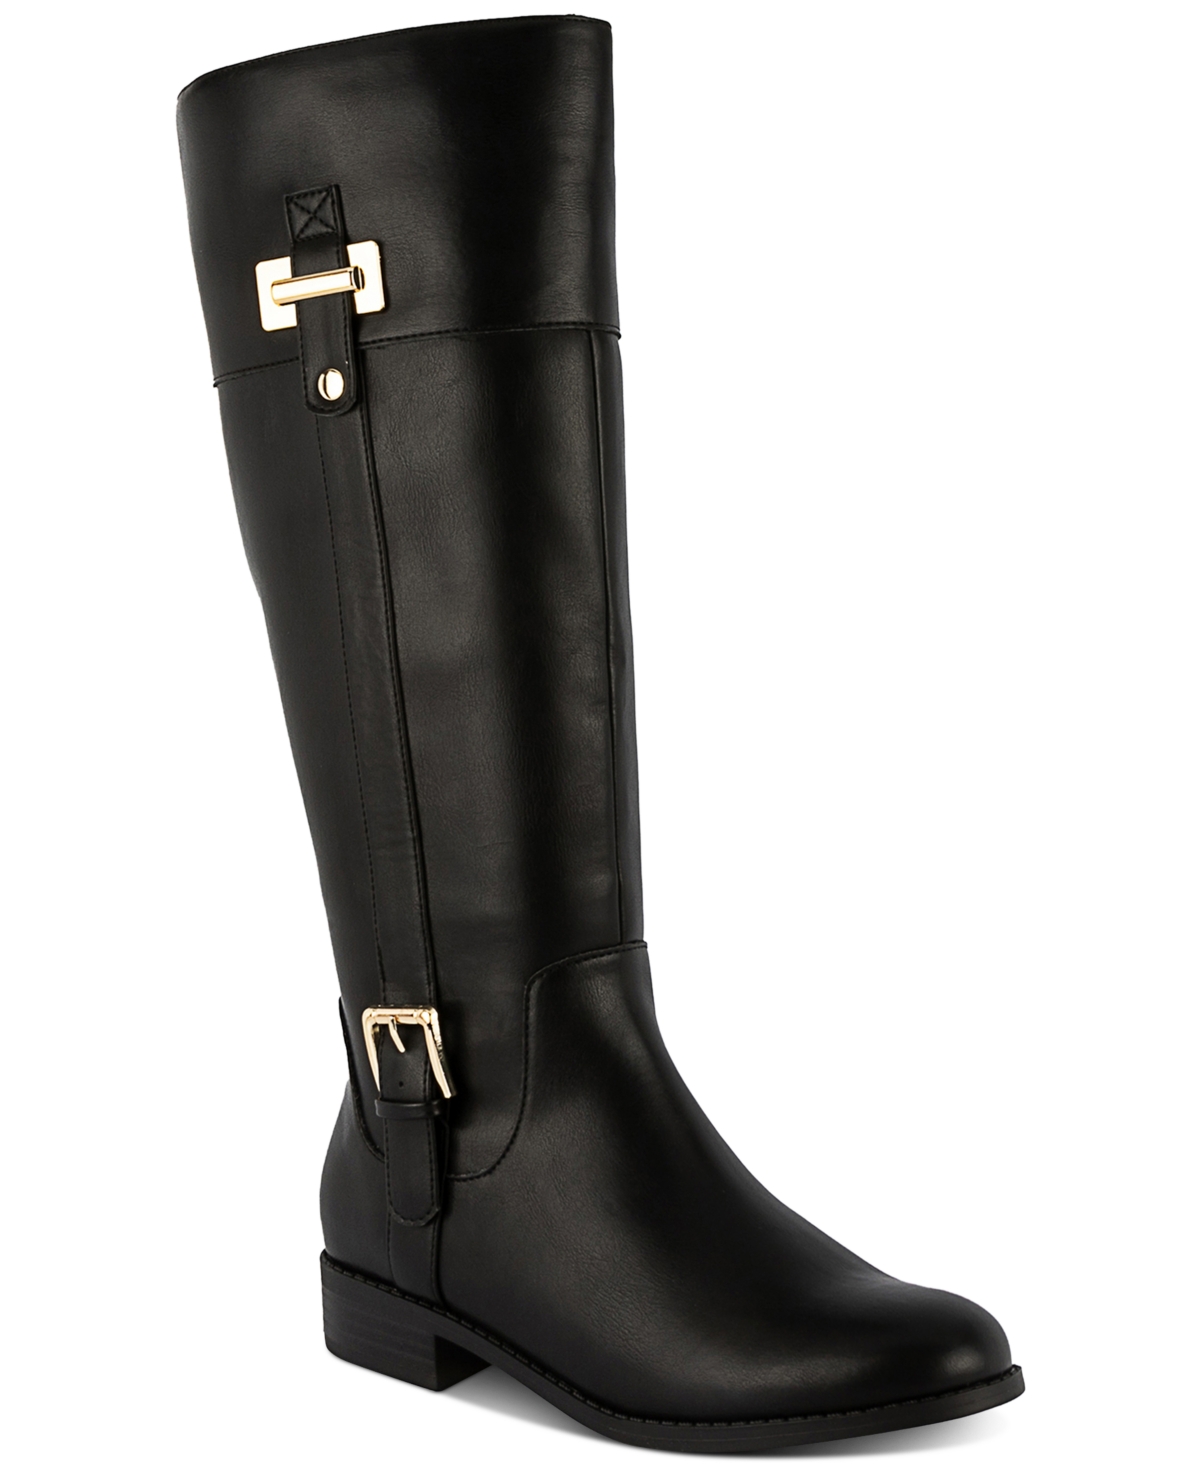 Women's Edenn Buckled Wide-Calf Riding Boots, Created for Macy's - Black Sm